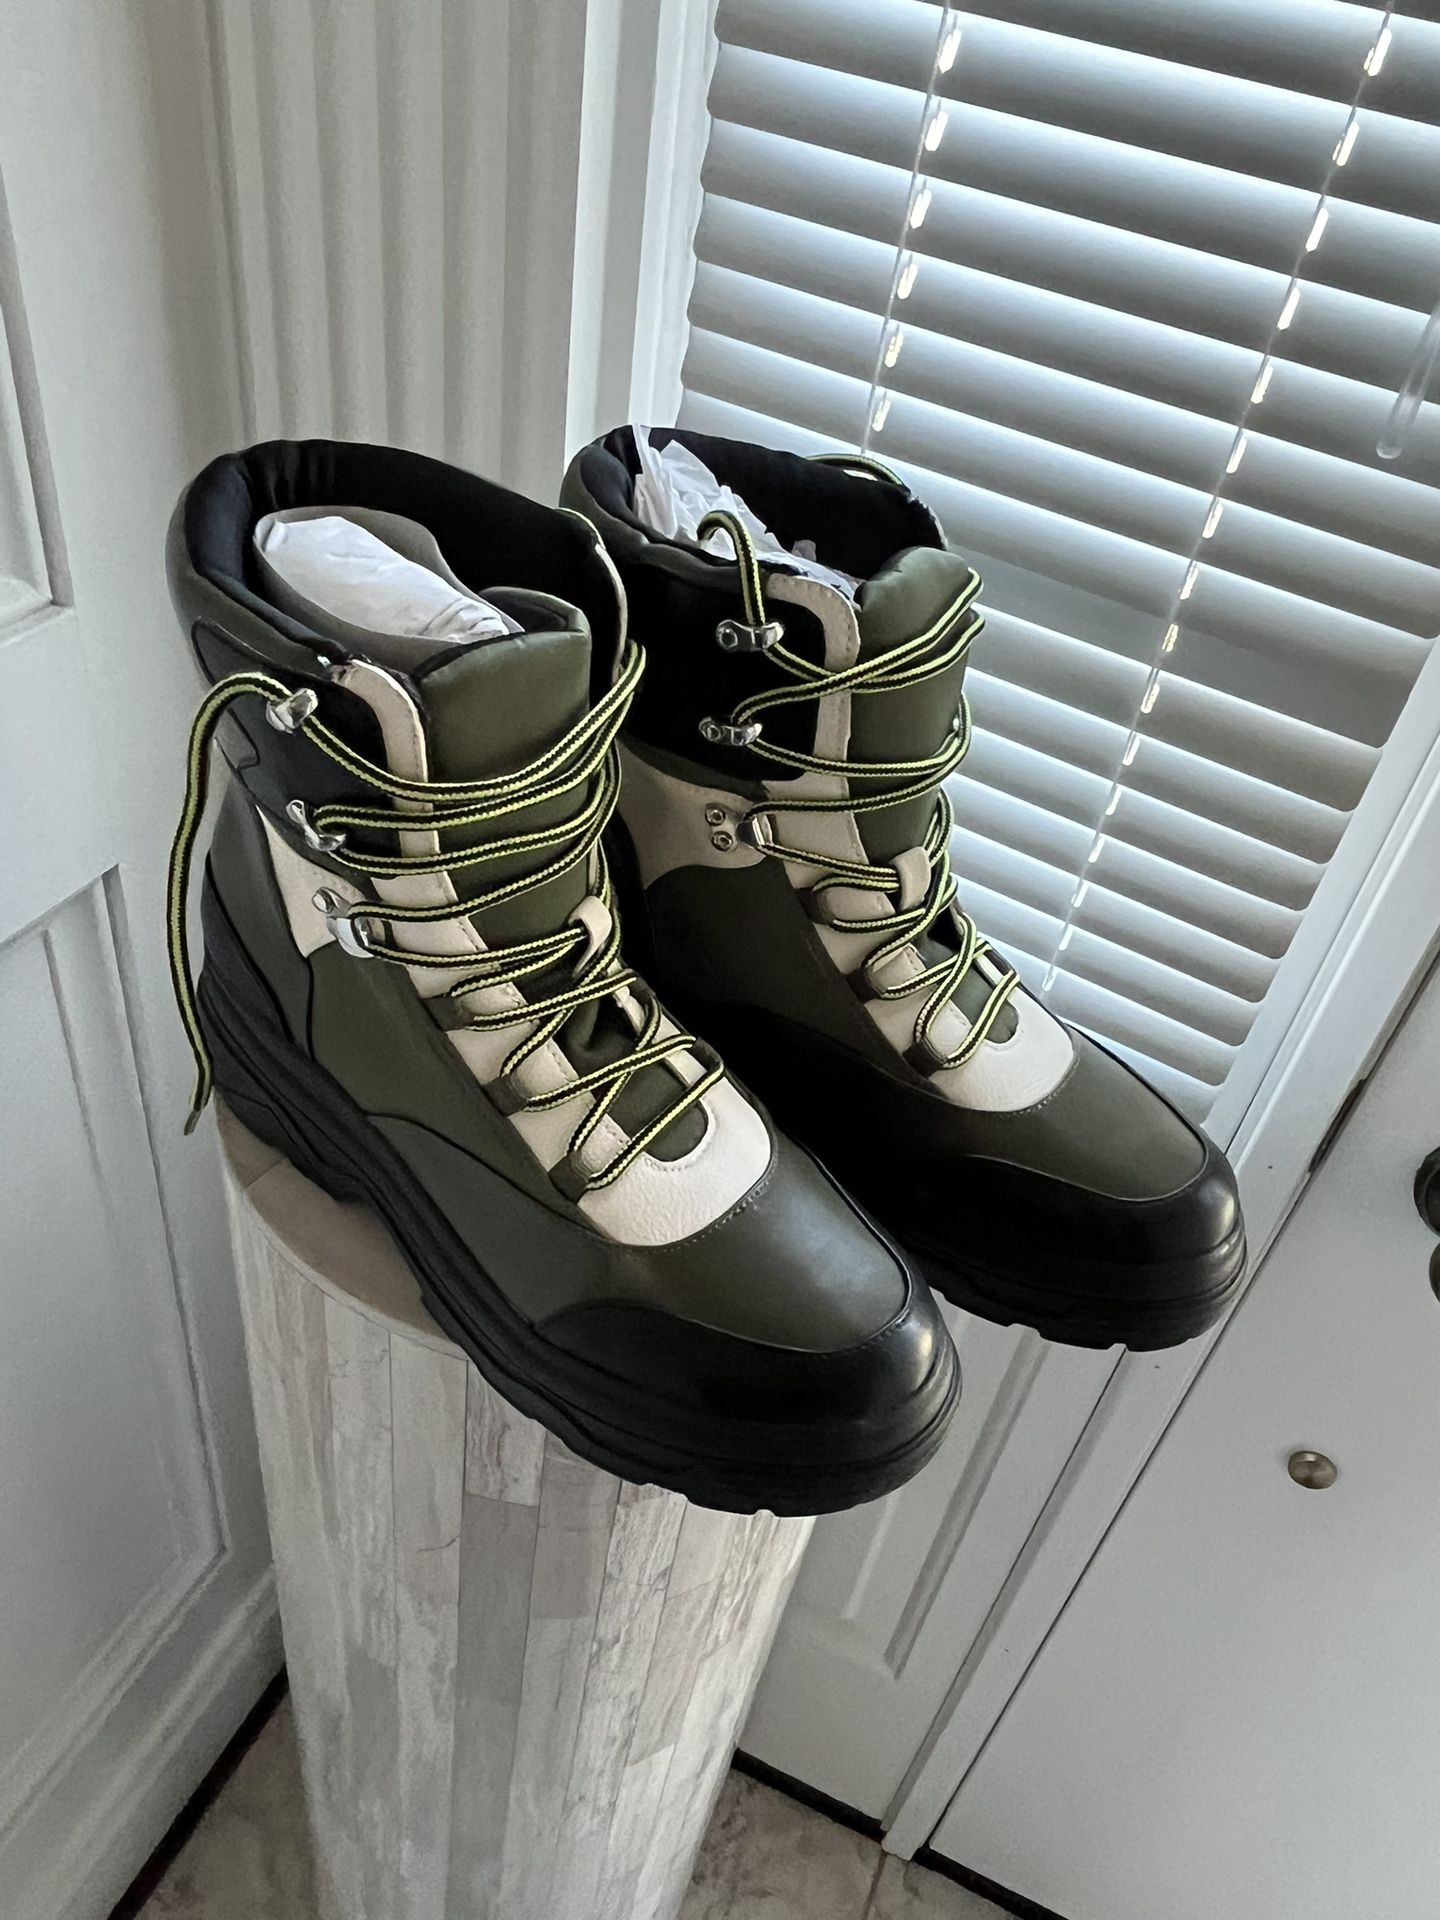 AASOS Snow/ Hiking Boots